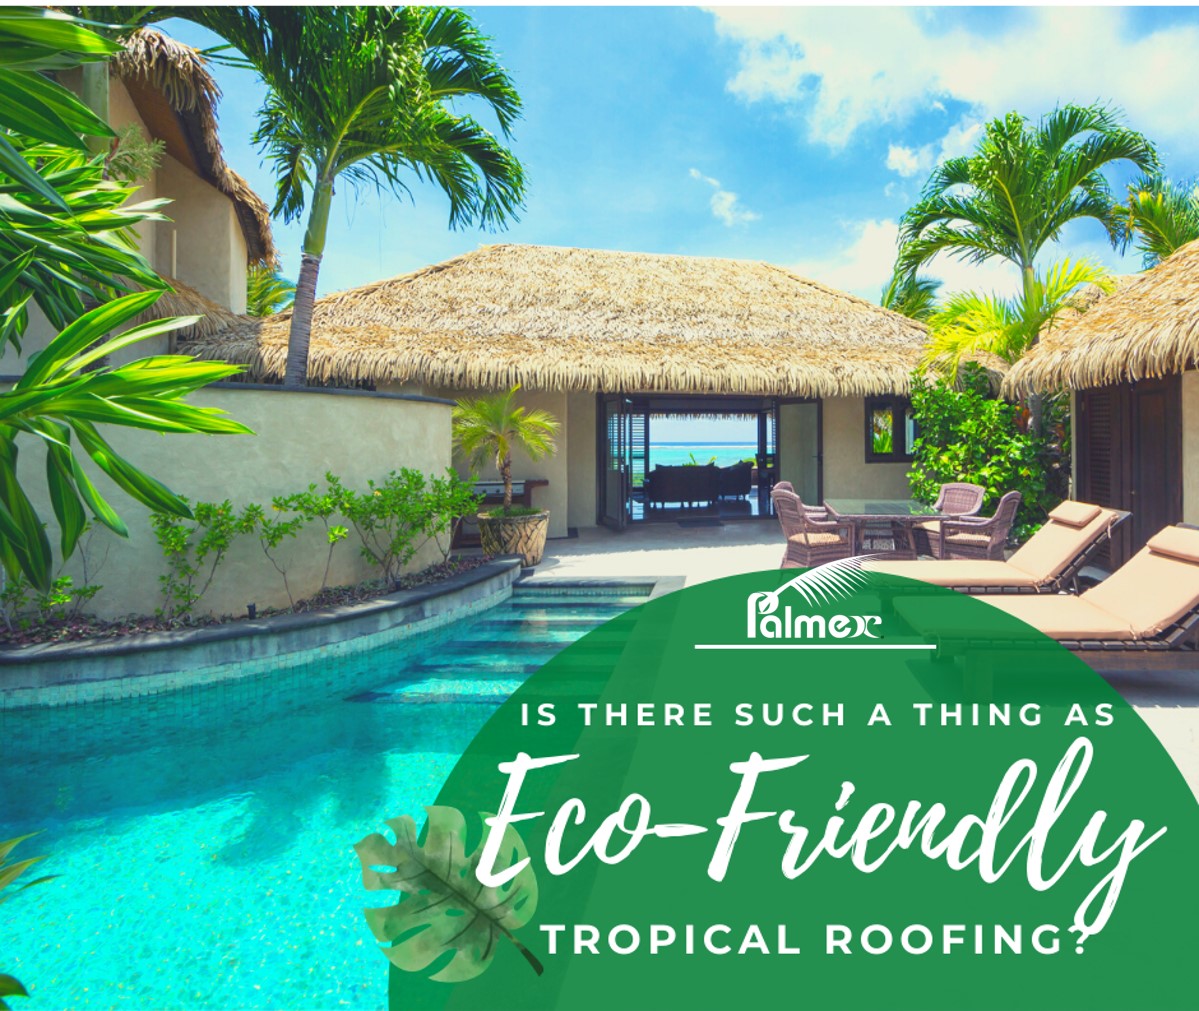 Is there such a thing as Eco-Friendly Tropical Roofing?